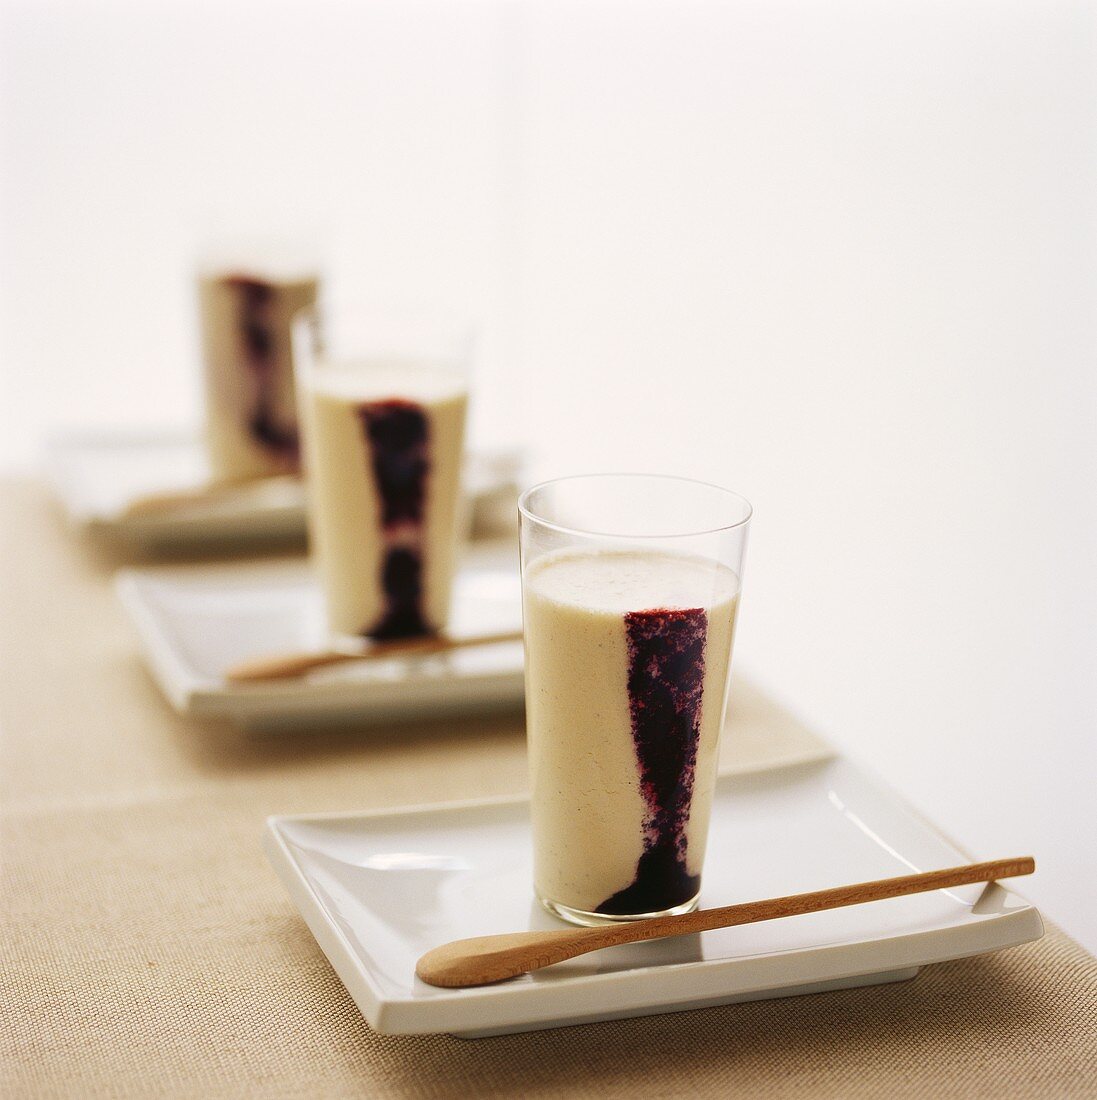 Pear and vanilla milk with blackberries